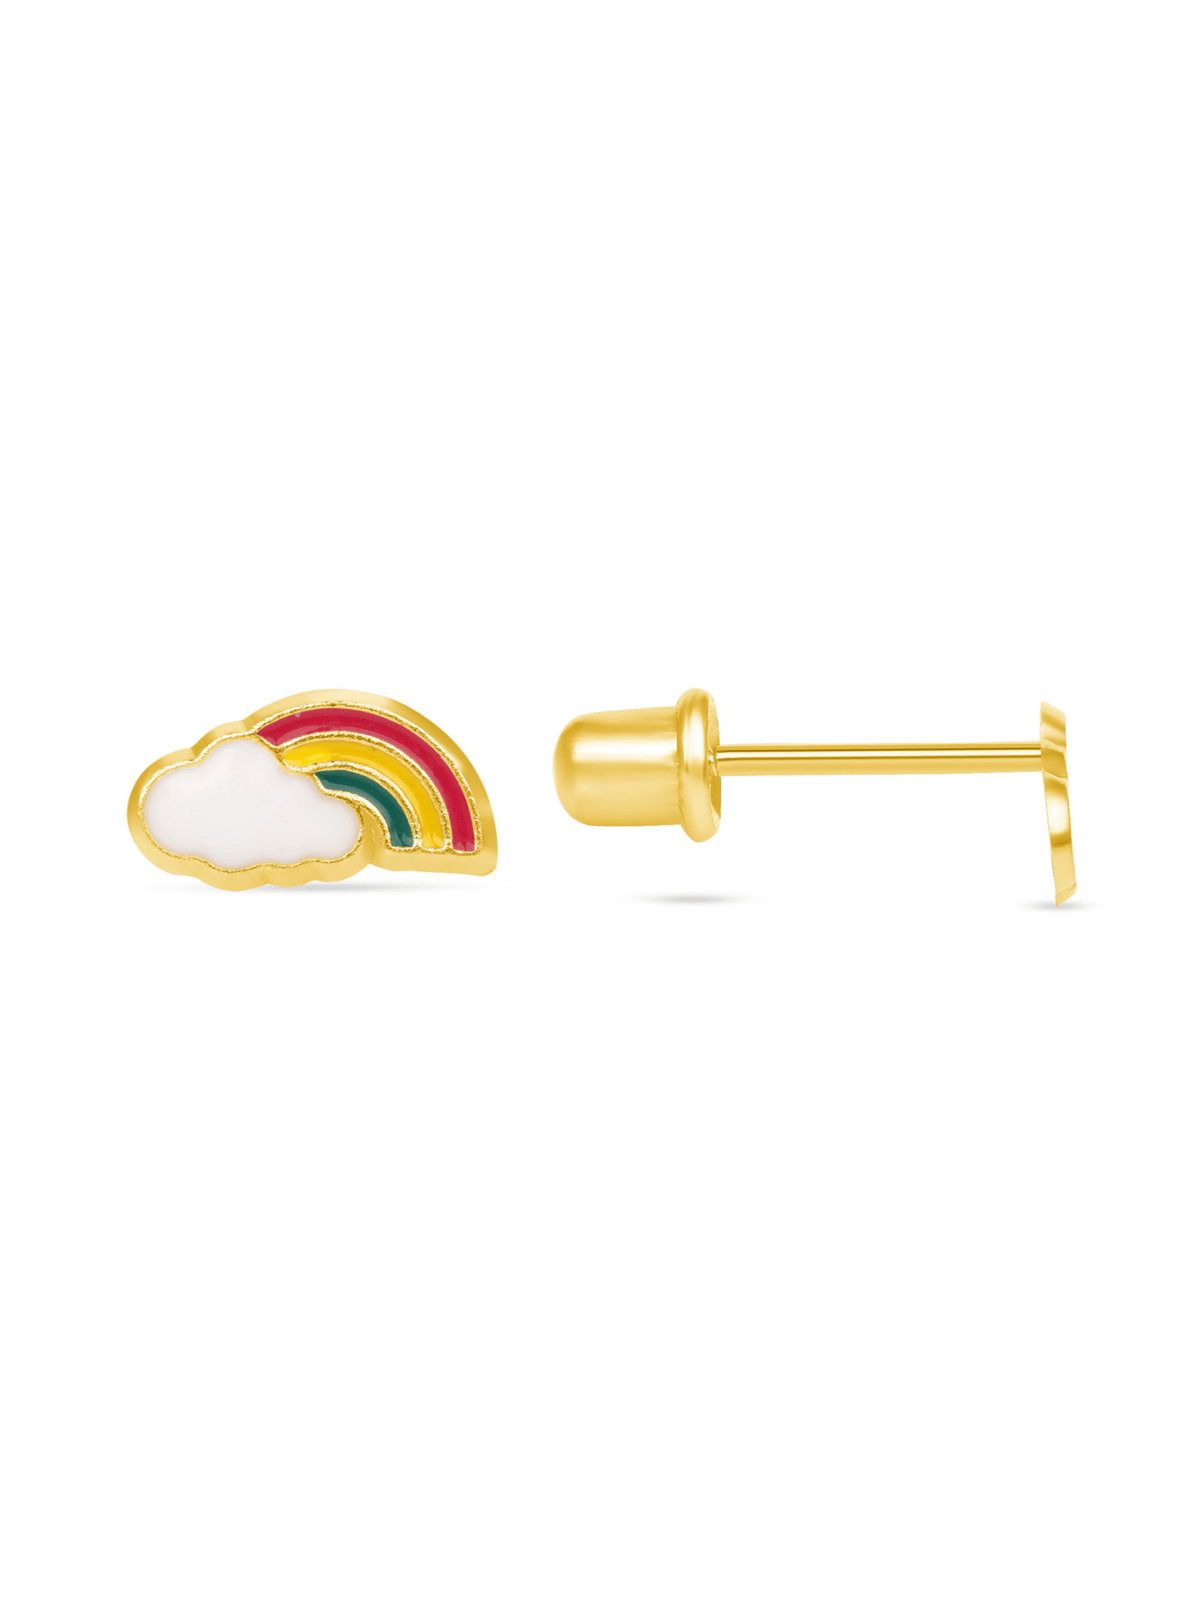 Rainbow stud earrings on a white background